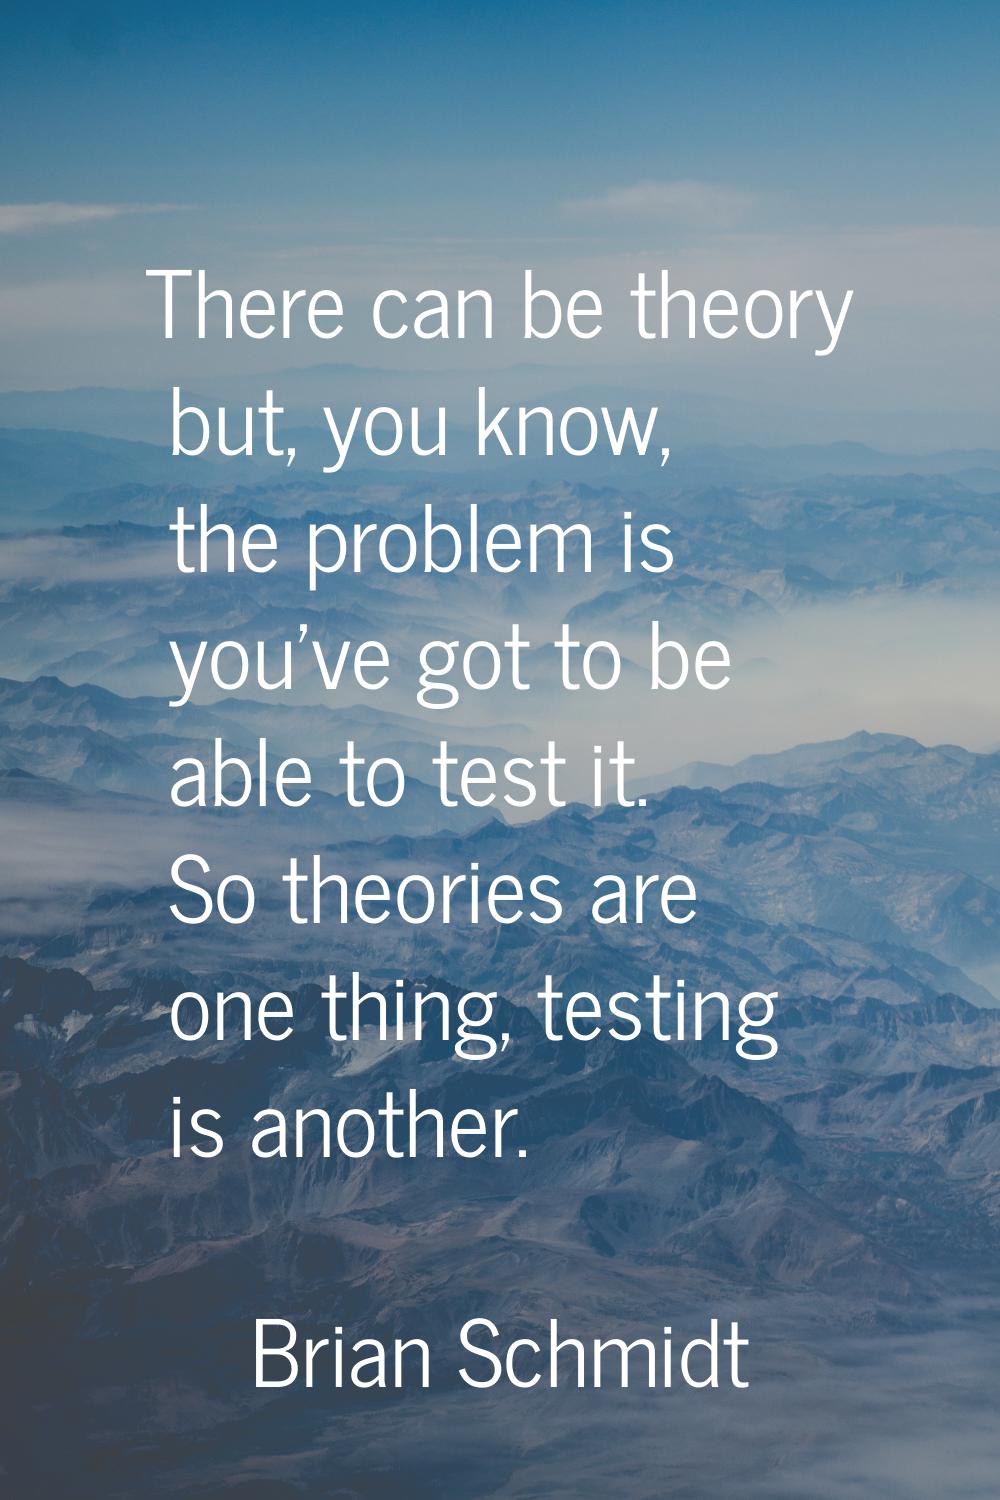 There can be theory but, you know, the problem is you've got to be able to test it. So theories are